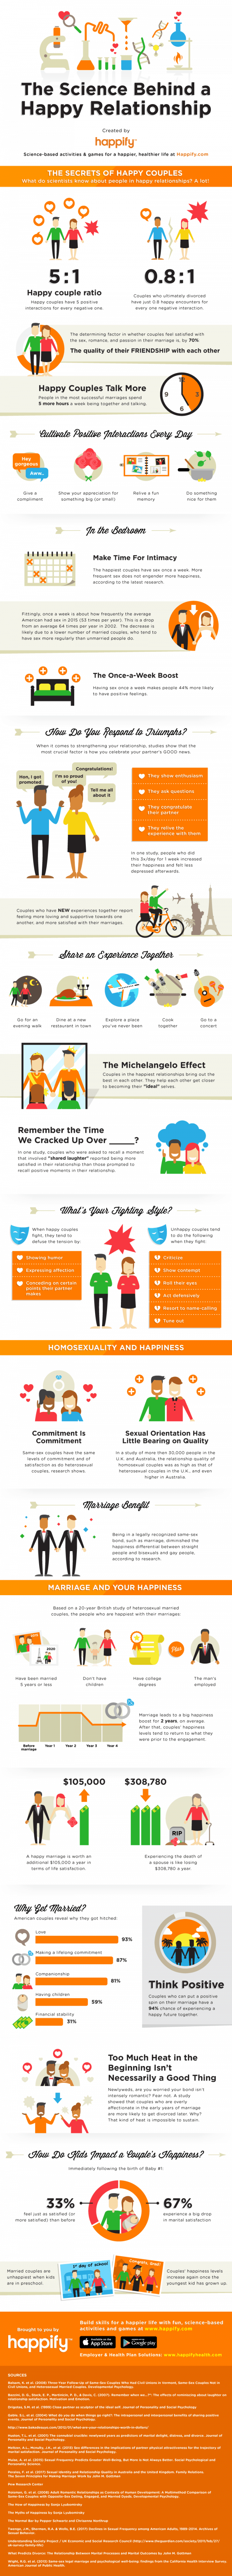 science of happy relationships infographic